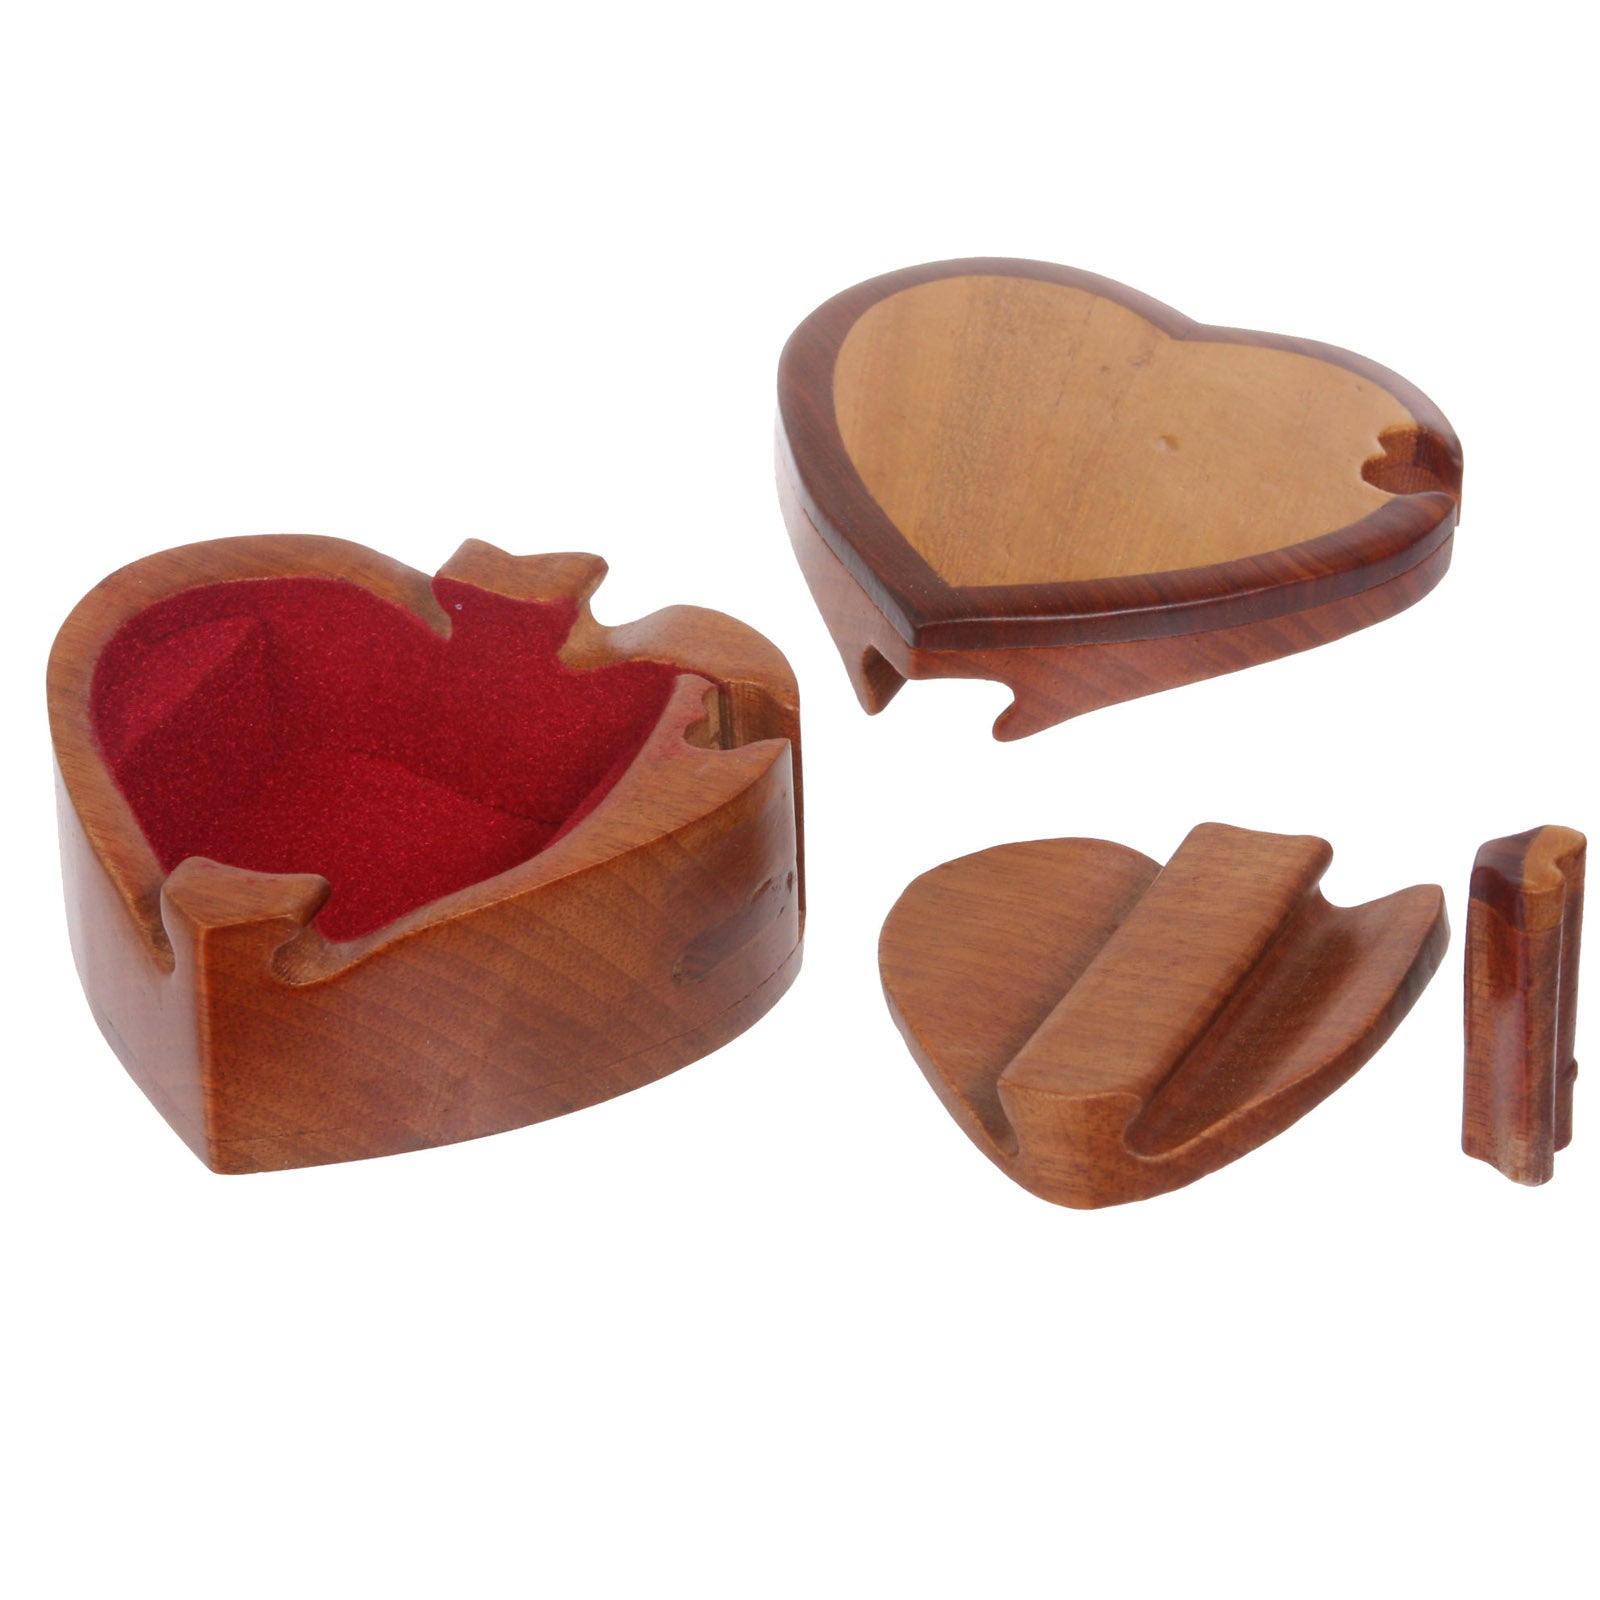 Handcrafted Wooden Heart Shape Secret Jewelry Puzzle Box